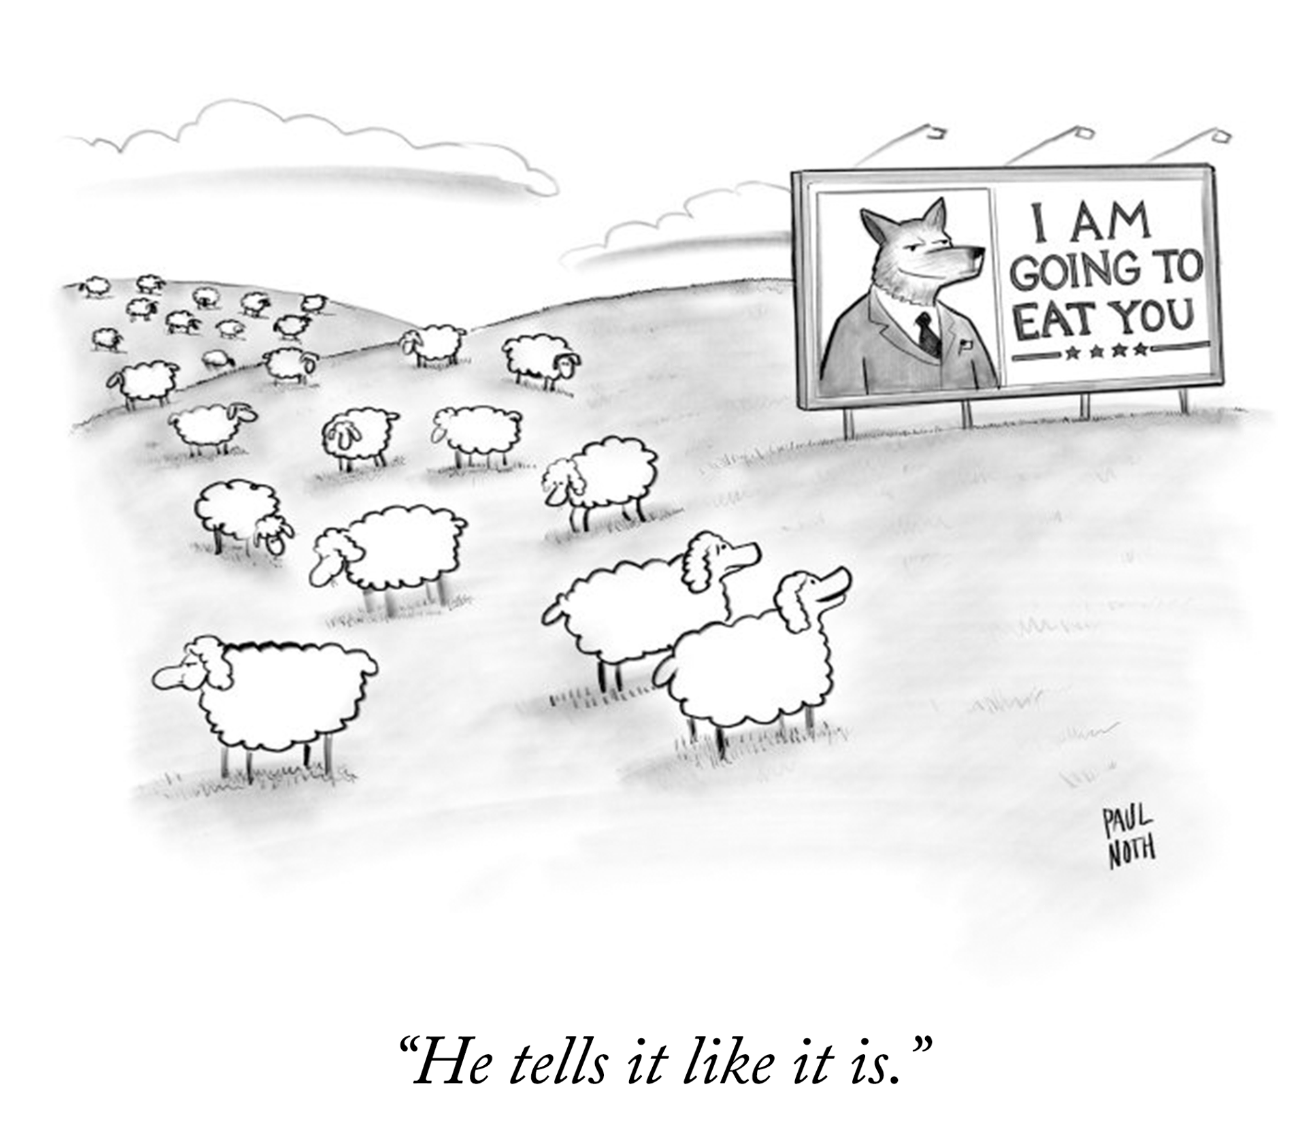 Cartoon by Paul Noth shows a flock of sheep looking up at a billboard showing a wolf saying "I am going to eat you". The cartoon's caption reads "He tells it like it is."